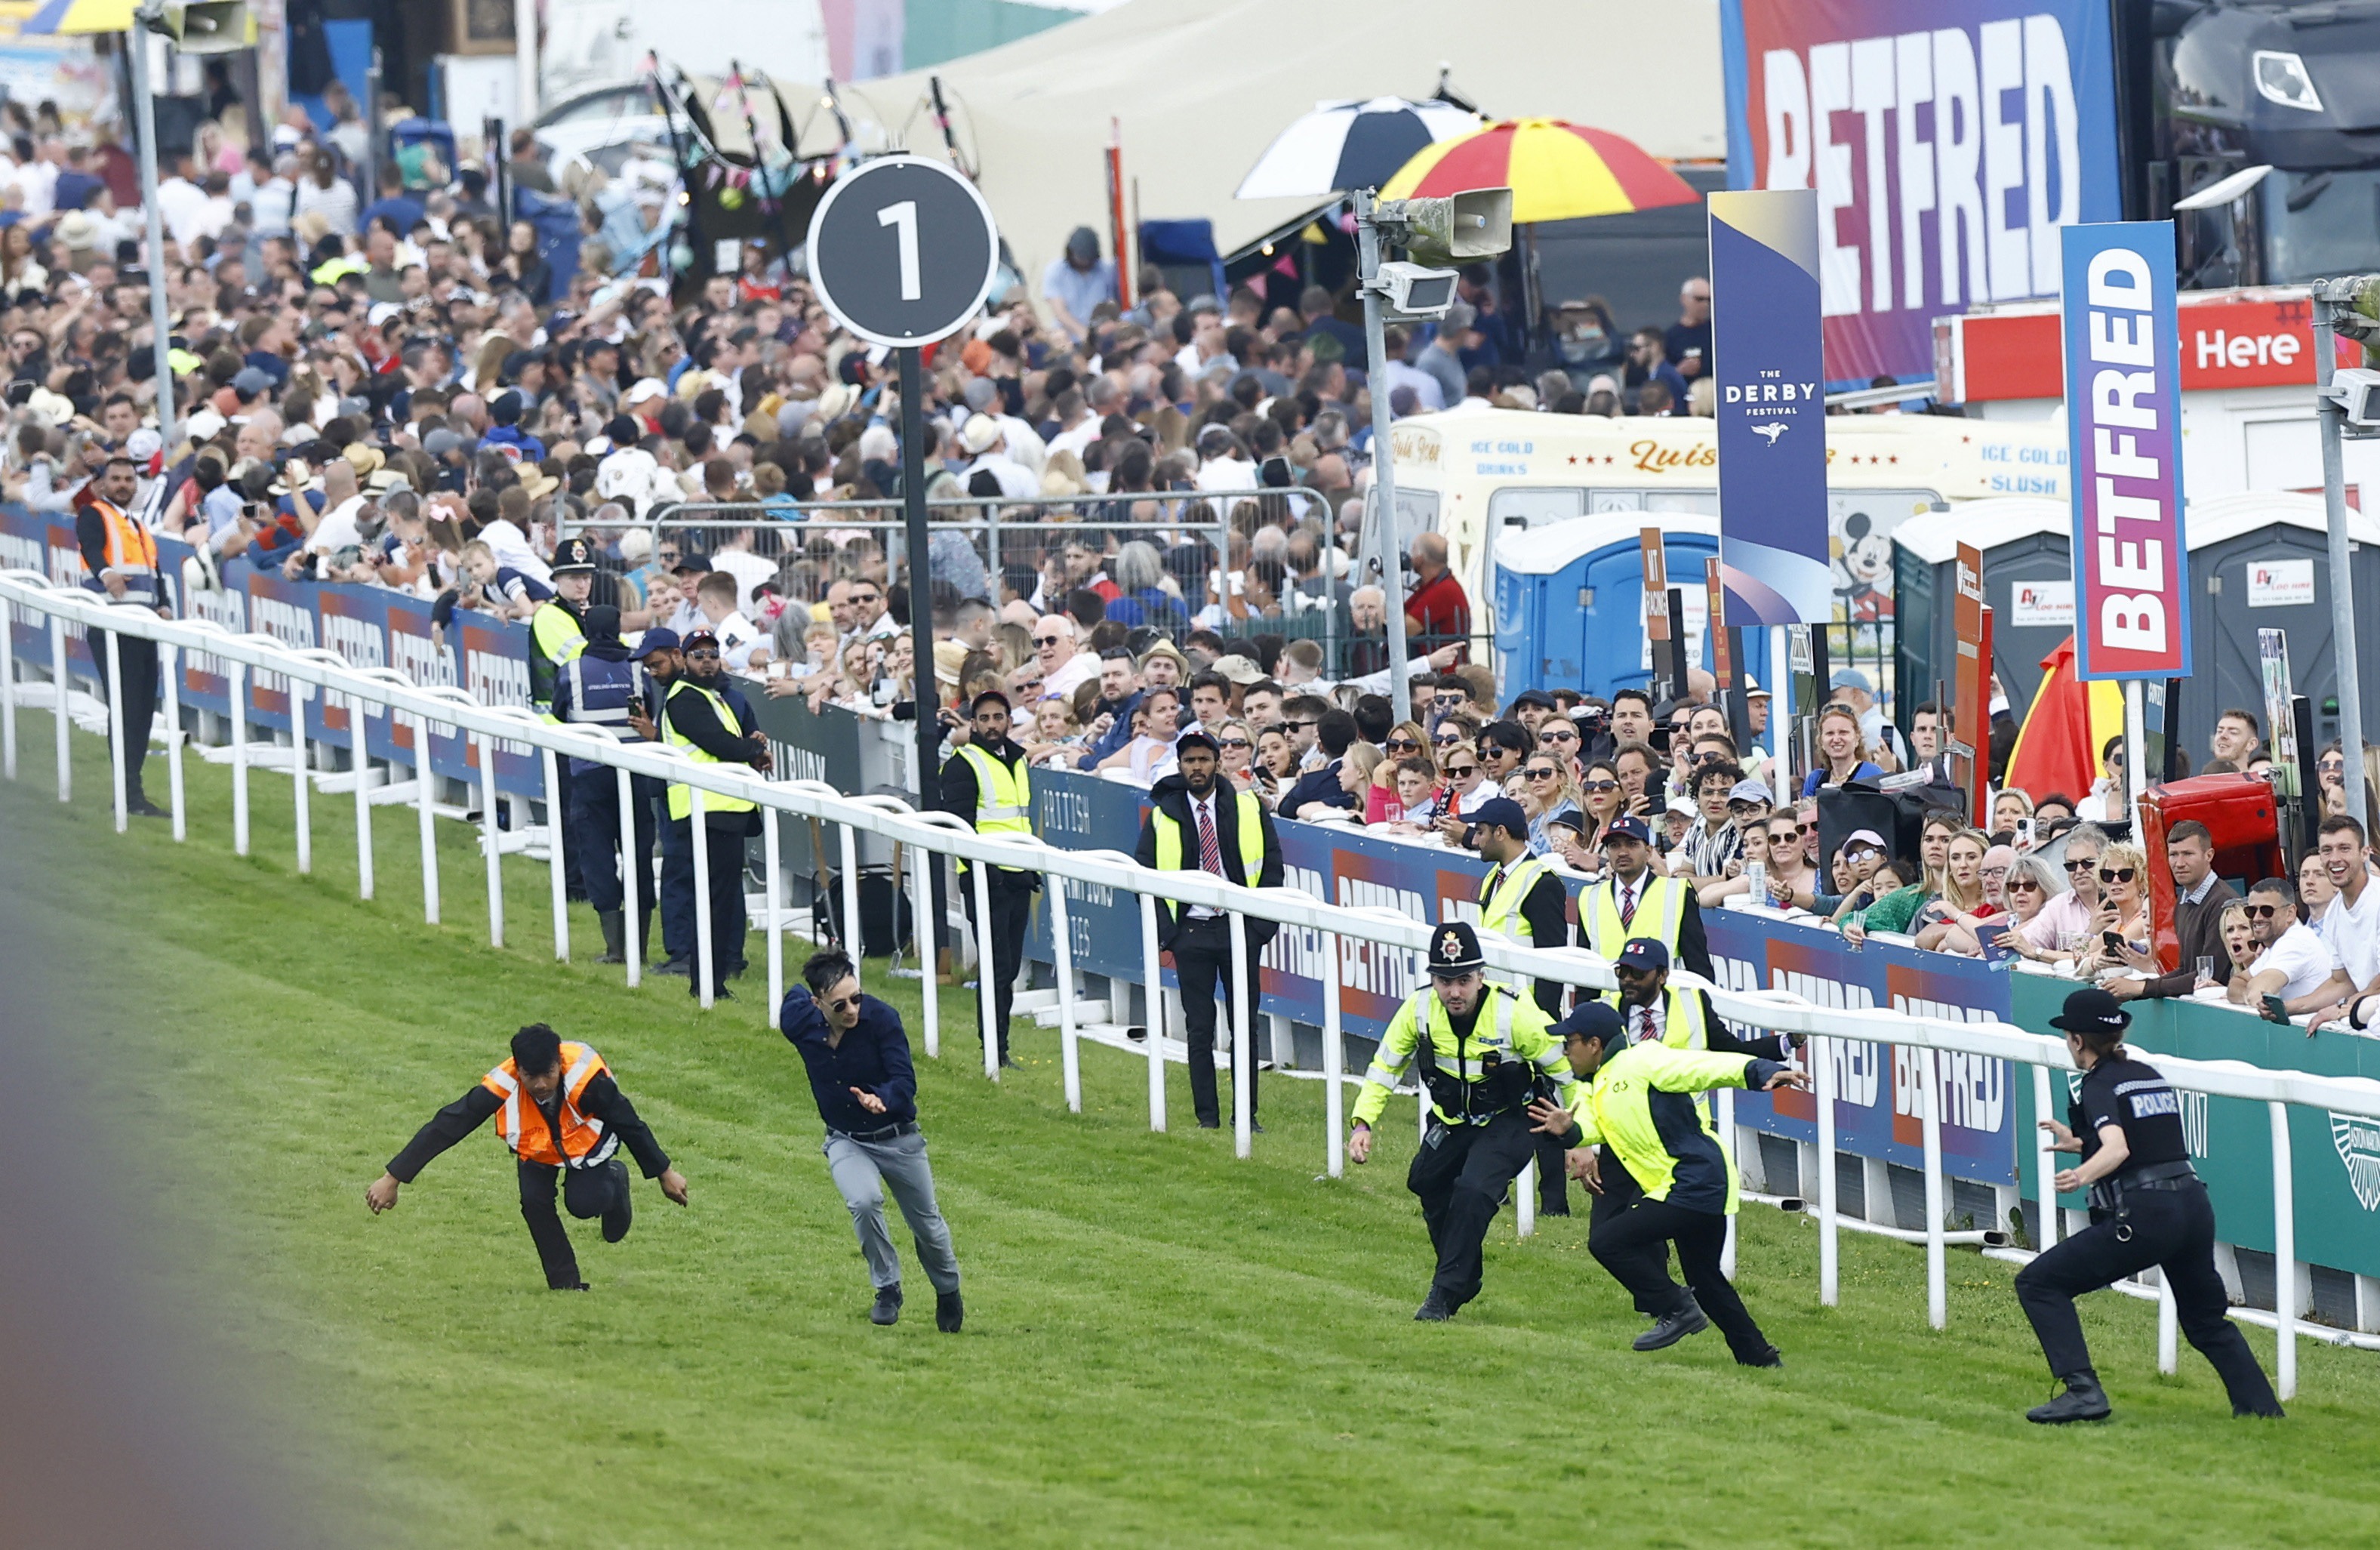 , Protestor sprinting on Epsom Derby racecourse tackled as animal activists’ plot to disrupt race is foiled